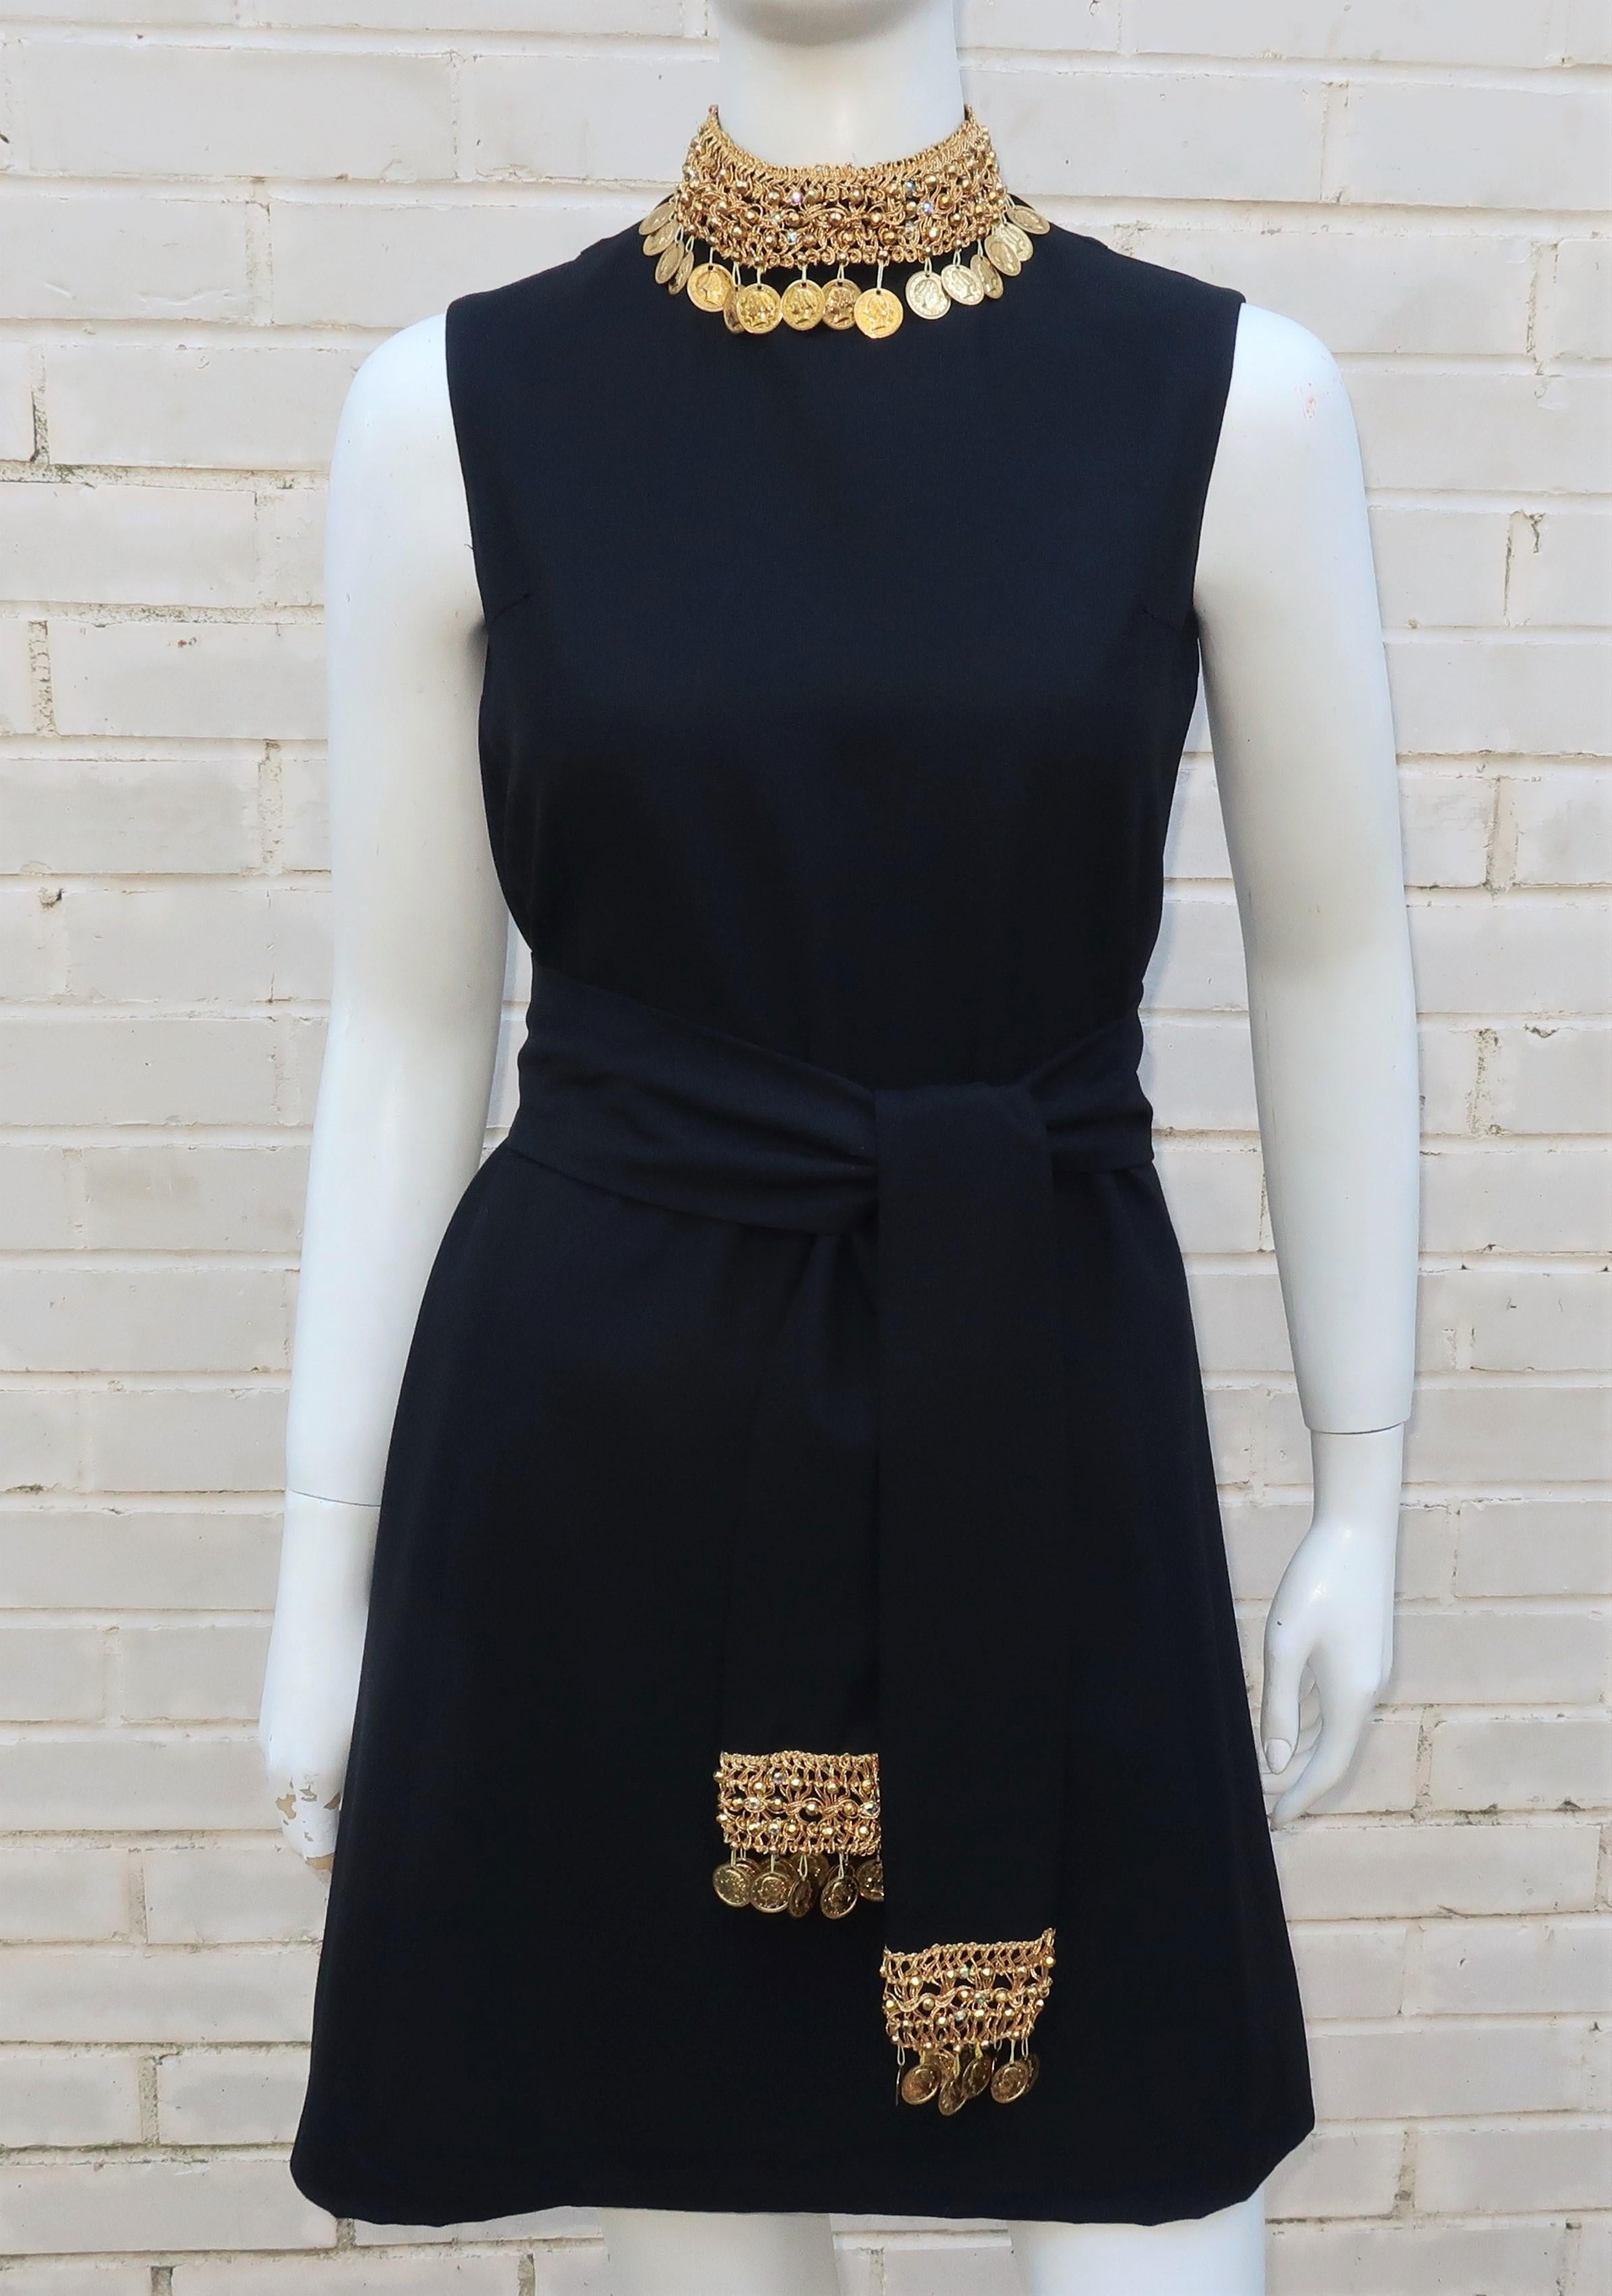 A 1960's jazzed up version of the little black dress in a black crepe fabric with gold braiding at the collar and sash embellished by beading, iridescent rhinestones and gold coins.  The simple a-line sleeveless mini dress silhouette zips and hooks